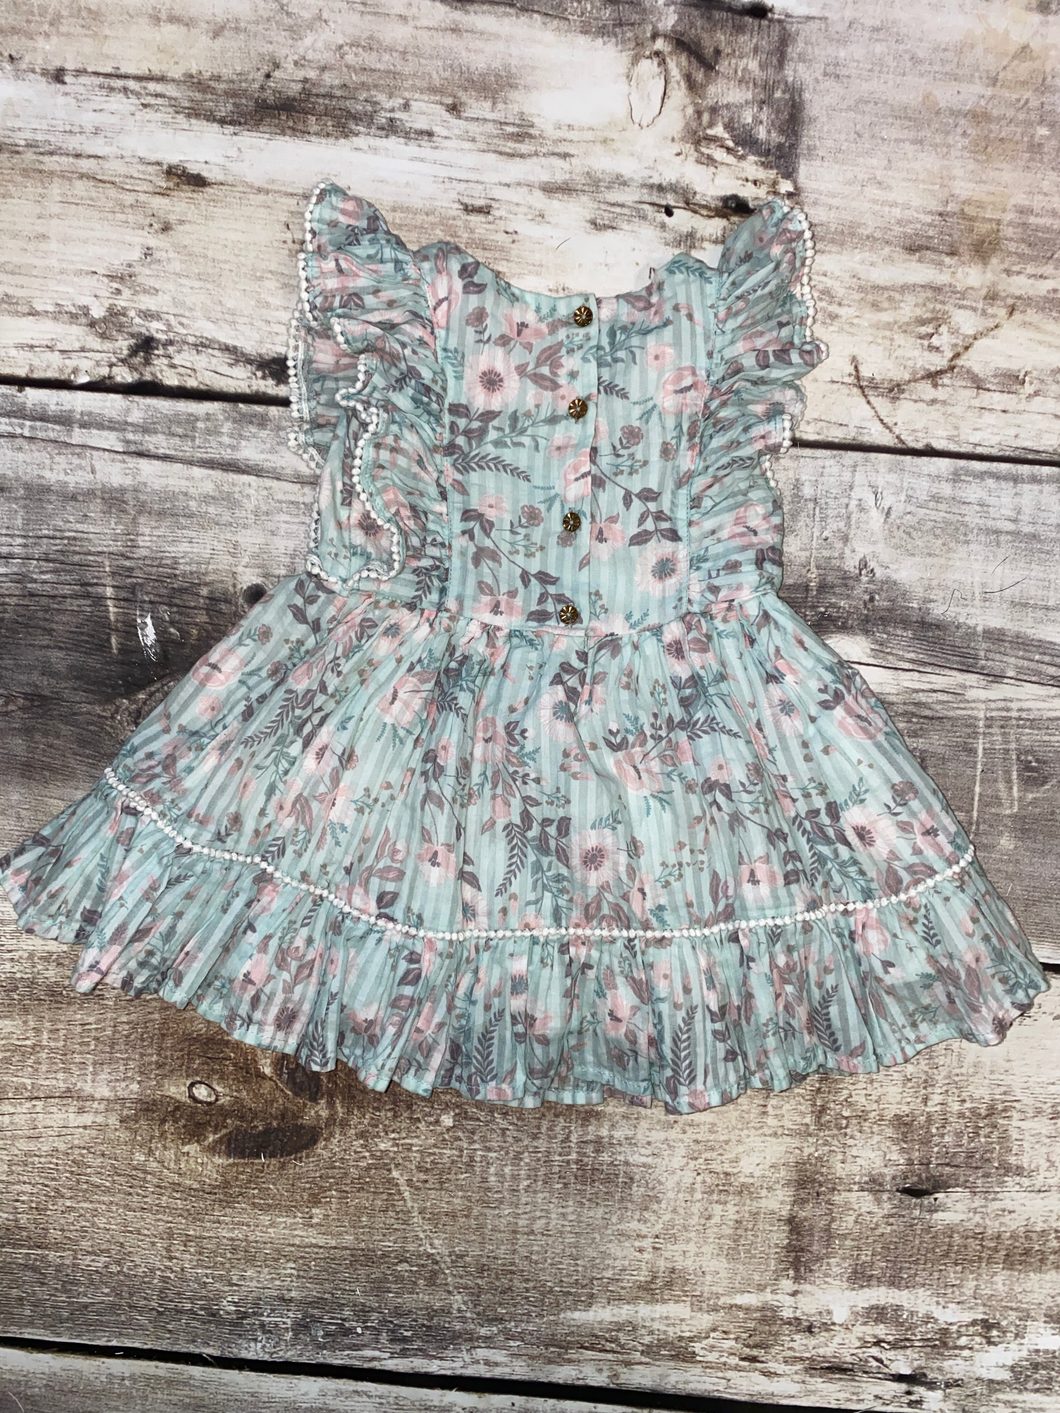 Shabby Chic 12 month dress w/bloomers